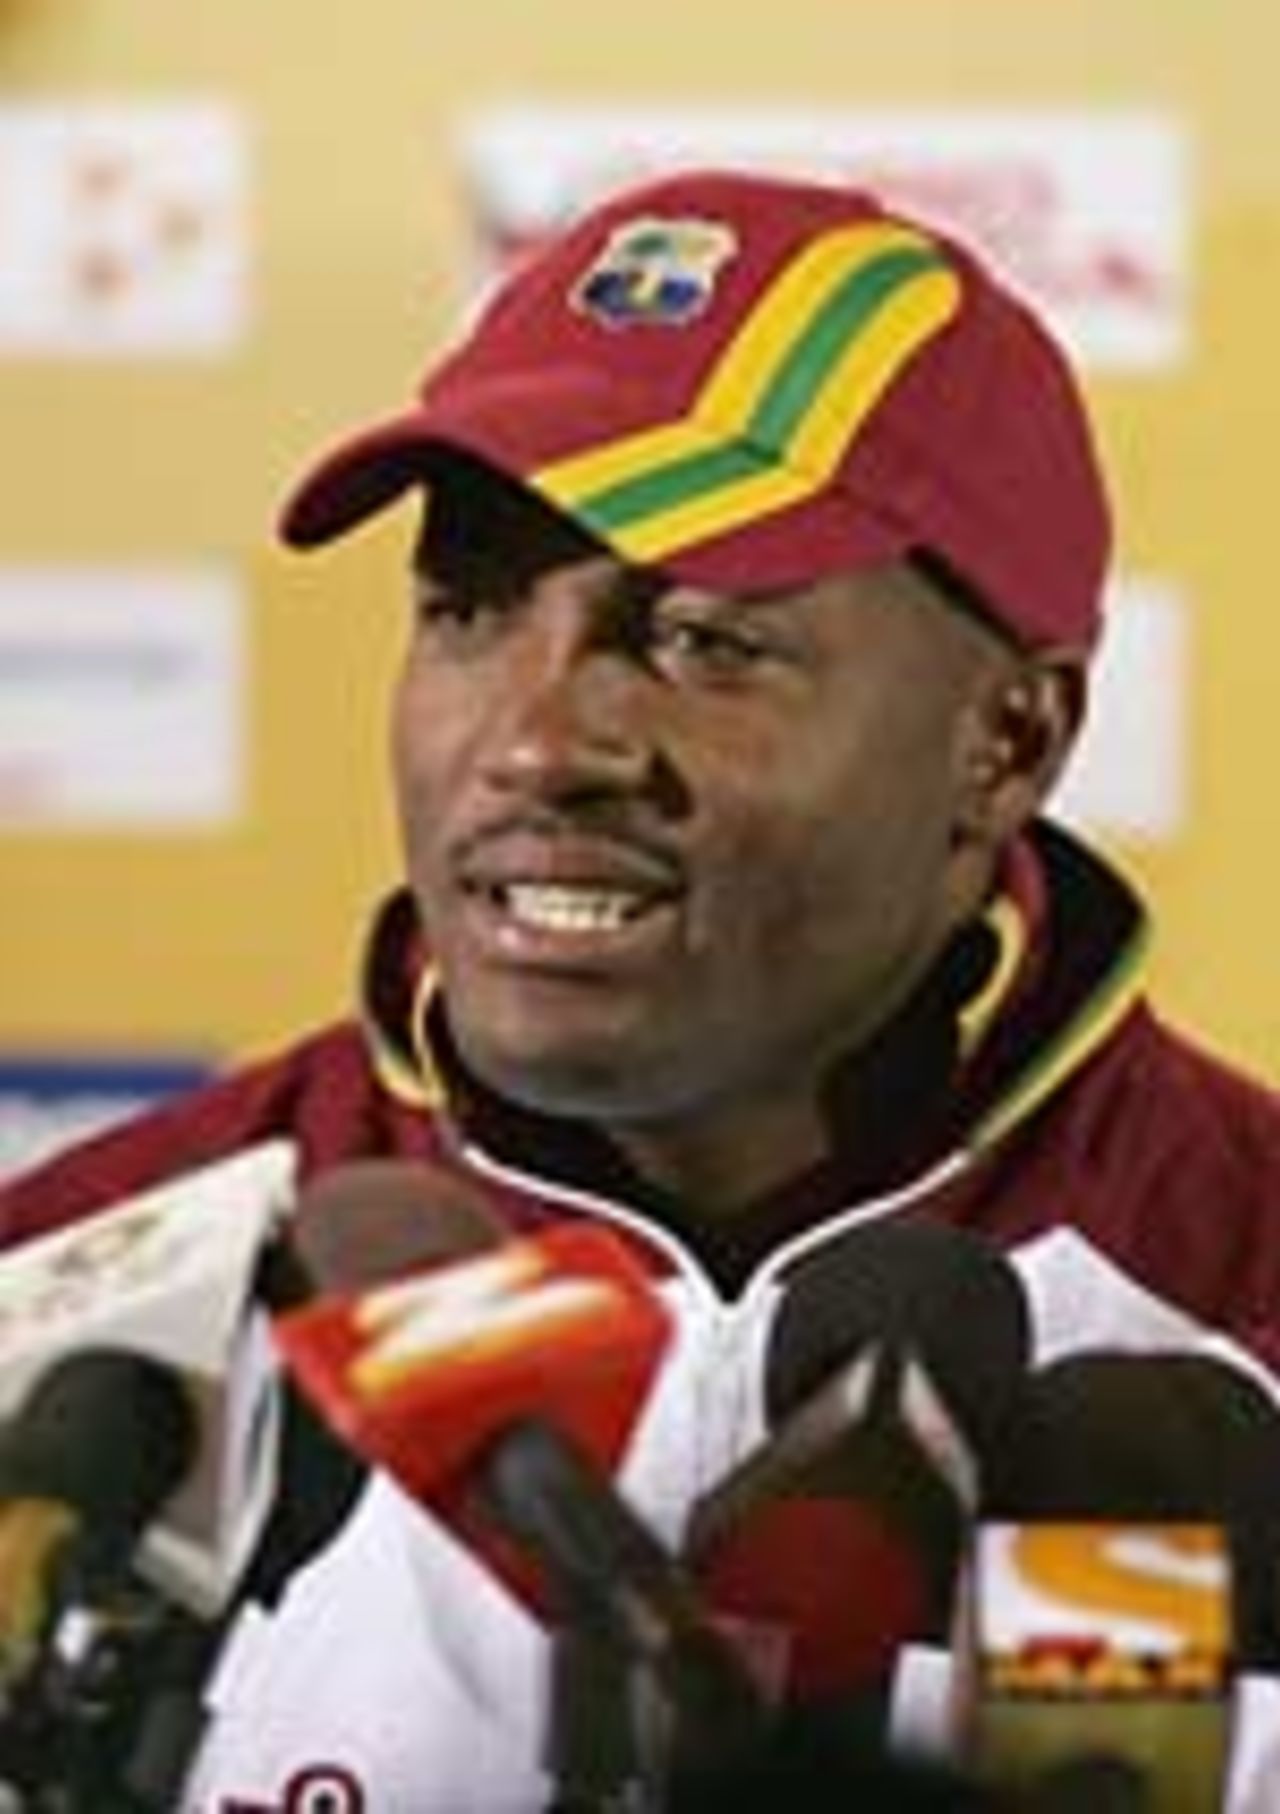 Brian Lara at press conference ahead of Champions Trophy final